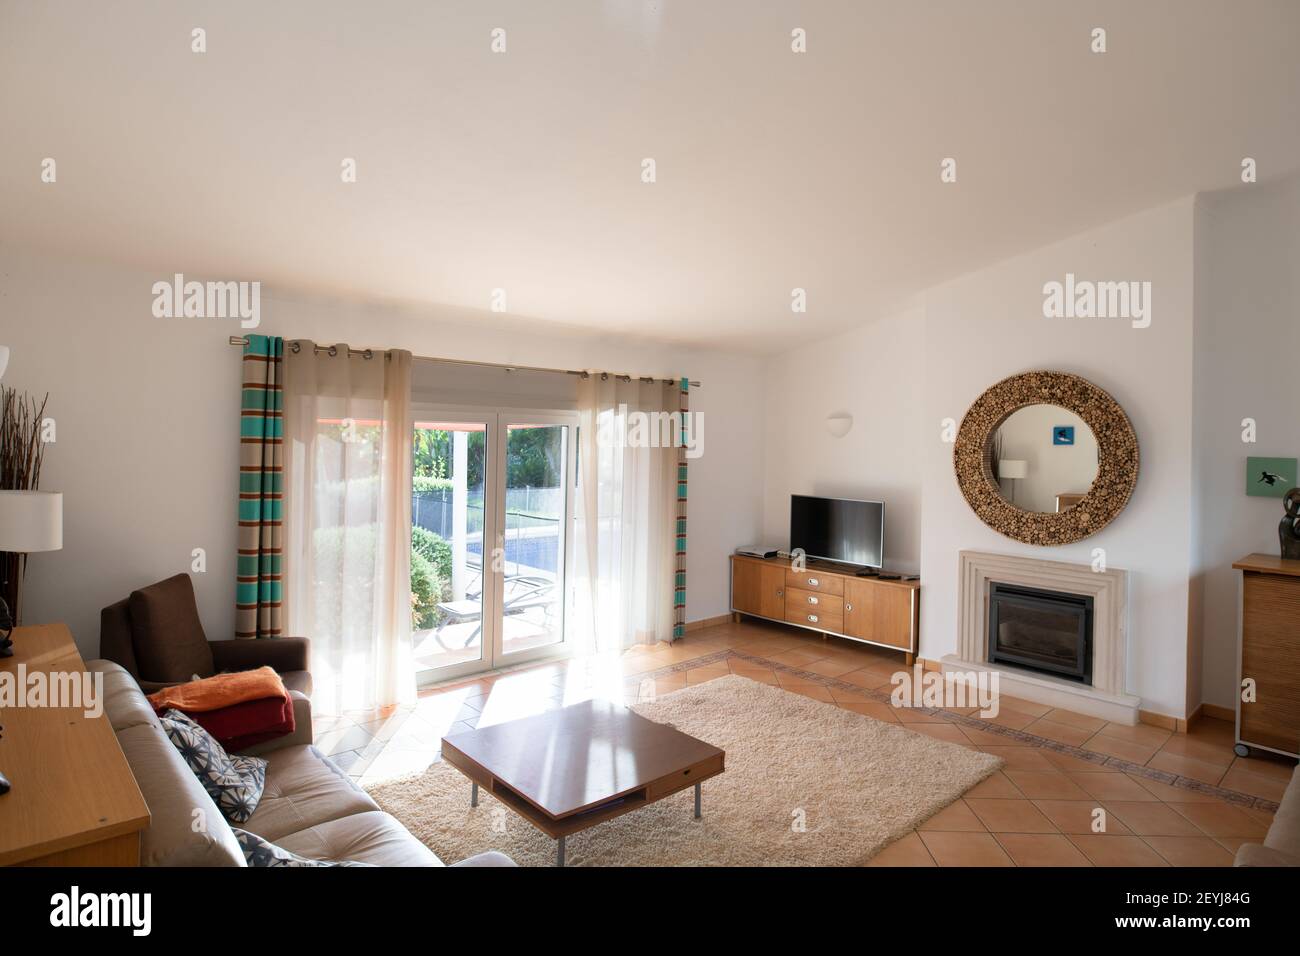 Living room with tiled floors, patio doors and high sloping ceiling Stock Photo